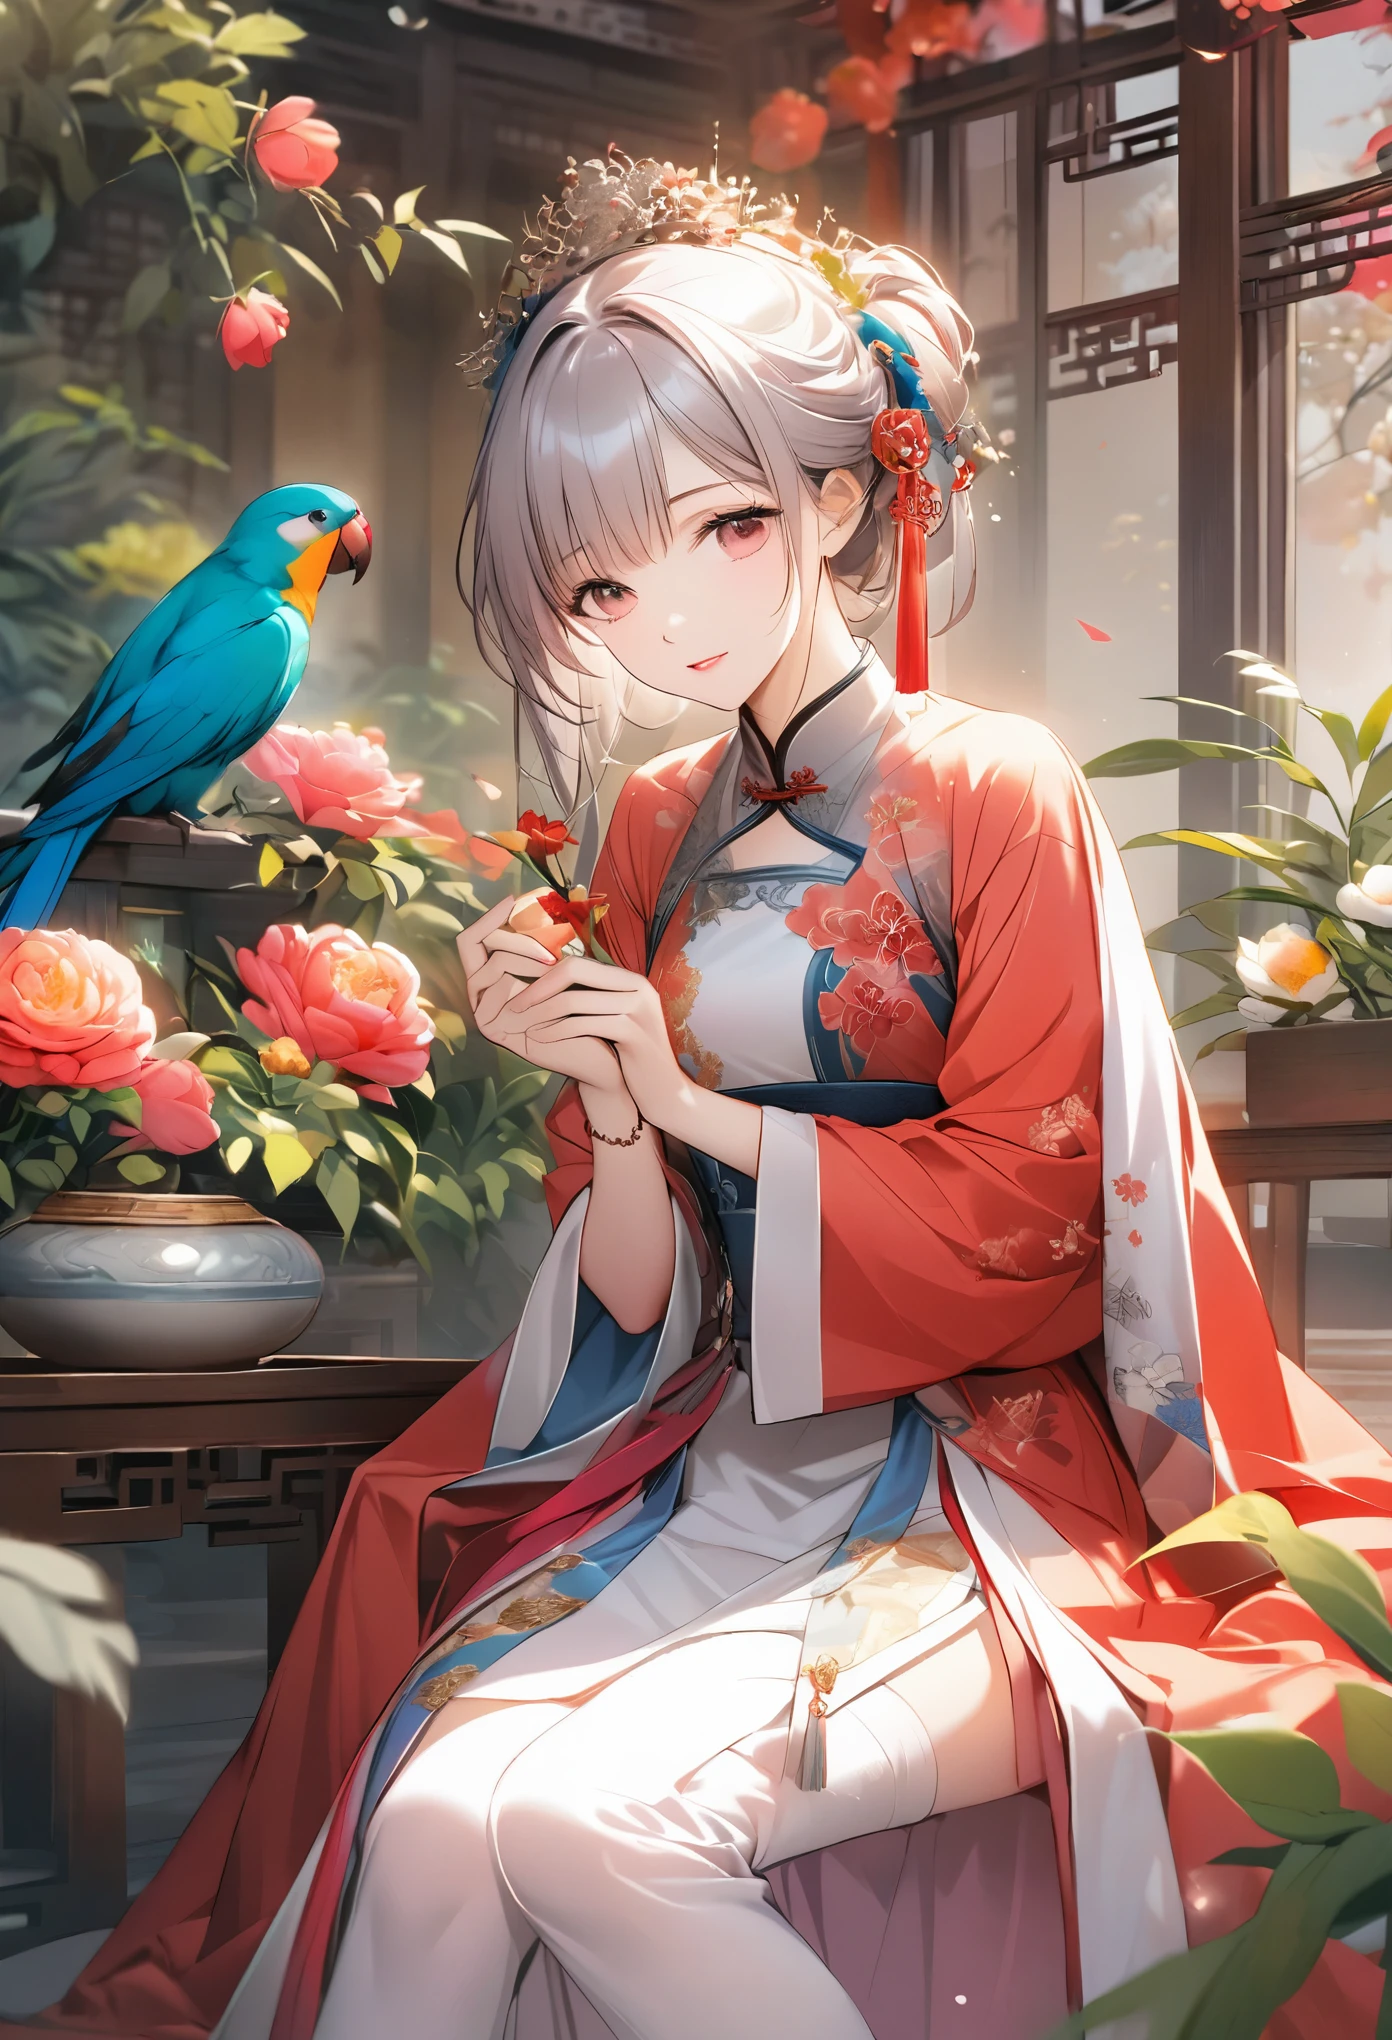 A beautiful young woman in traditional Chinese attire, surrounded by a lush garden. She is holding a parrot on her finger, gazing at it with gentle eyes. The woman's hair is styled in an elaborate updo adorned with flowers and traditional ornaments. Her dress is elegant, featuring fine silk with floral embroidery. The garden is in full bloom, with peonies and other flowers providing a backdrop. The scene captures the serenity and beauty of classical Chinese art, with a touch of nature harmony, (((Ultra-high saturation, high natural saturation, extremely bright colors)))